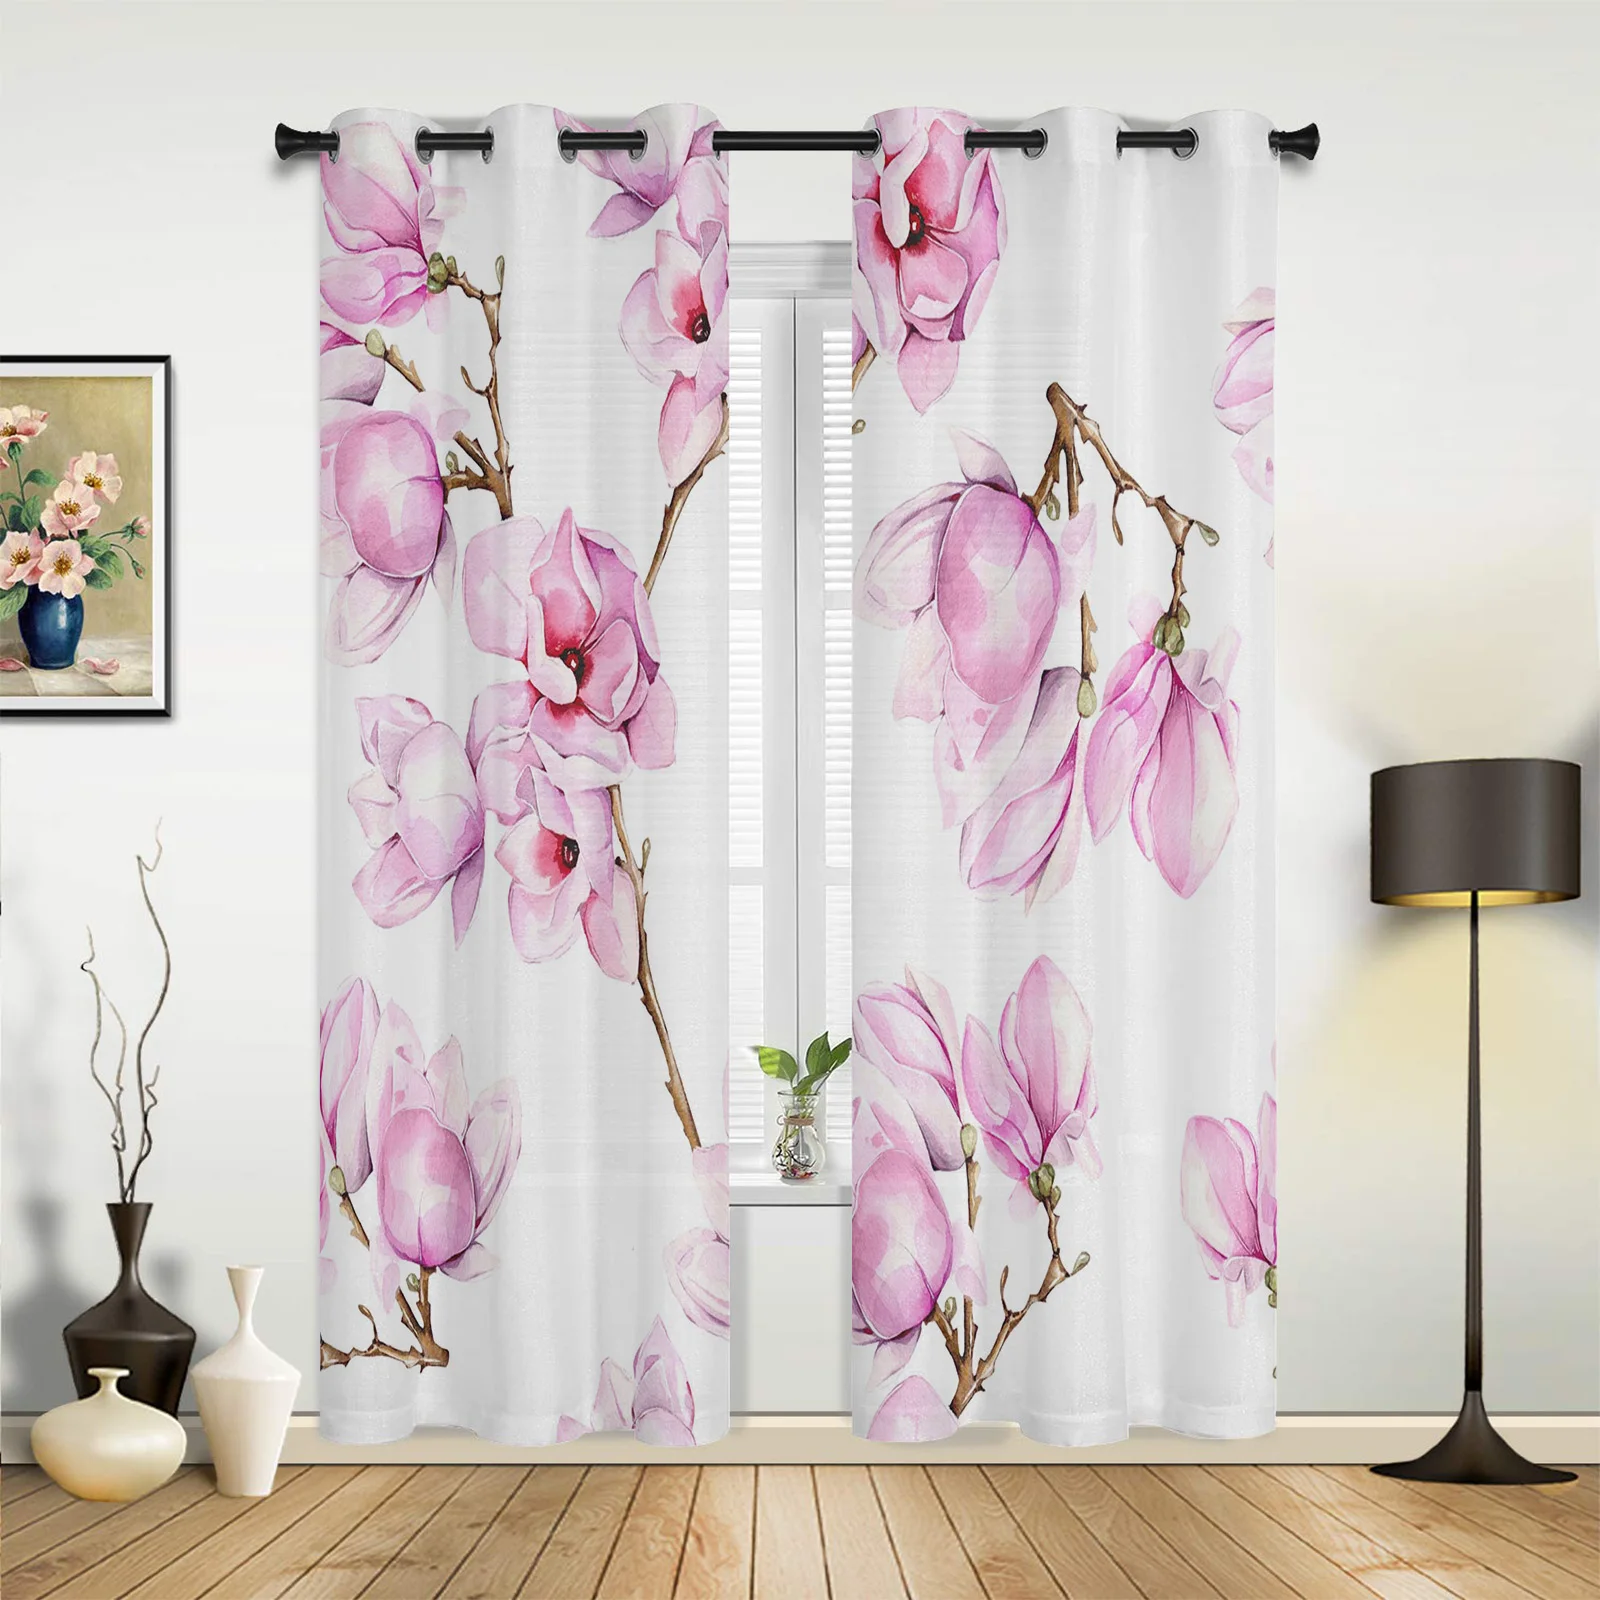 

Pink Flowers Orchid Branches Curtains for Bedroom Living Room Drapes Kitchen Children's Room Window Curtain Modern Home Decor